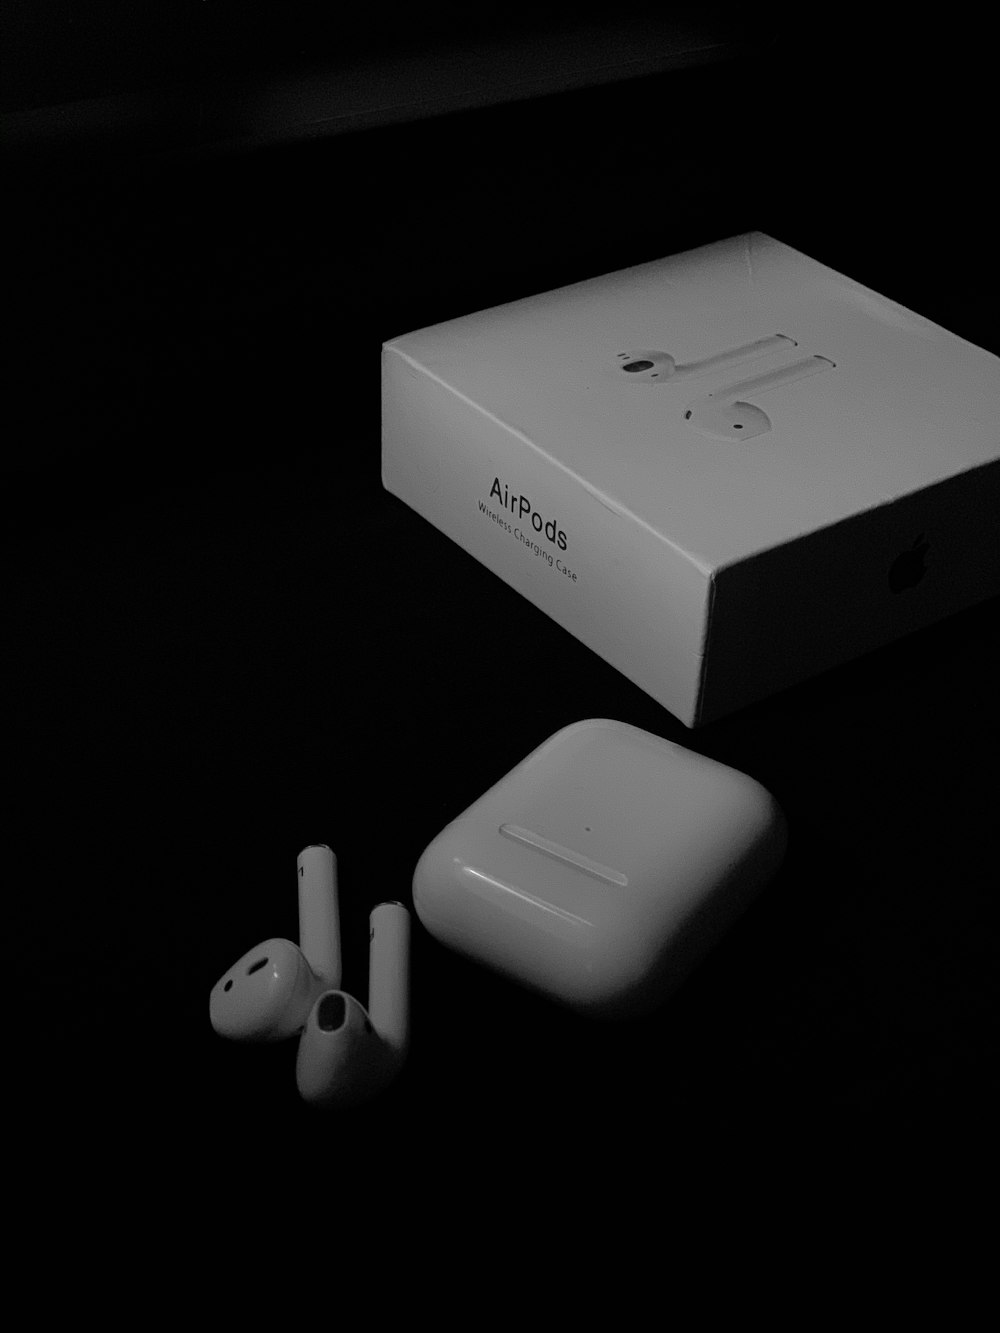 Airpods 2 Pictures | Download Free Images on Unsplash